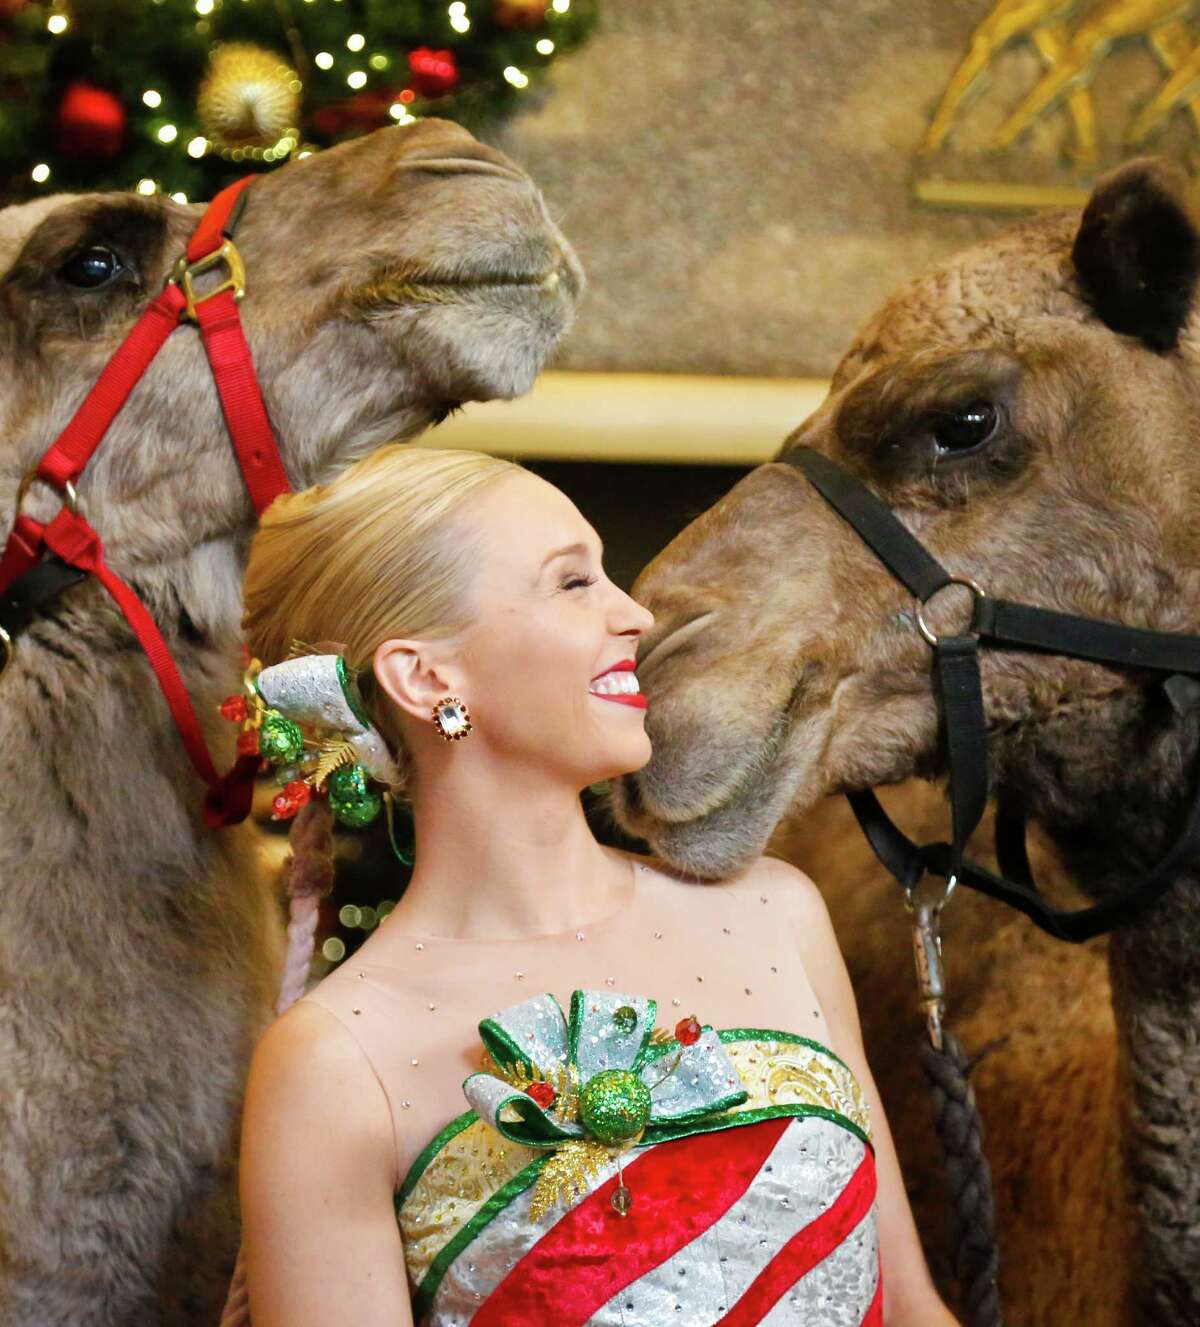 Radio City Rockette star Lauren Renck stands between camels during the blessing of animals, Tuesday Nov. 1, 2016, at Radio City Music Hall in New York. Cardinal Timothy Dolan officiated a ceremony blessing camels, sheep and a donkey arriving for their first day of rehearsal for the nativity scene in the "Christmas Spectacular Starring the Radio City Rockettes." (AP Photo/Bebeto Matthews) ORG XMIT: NYBM102